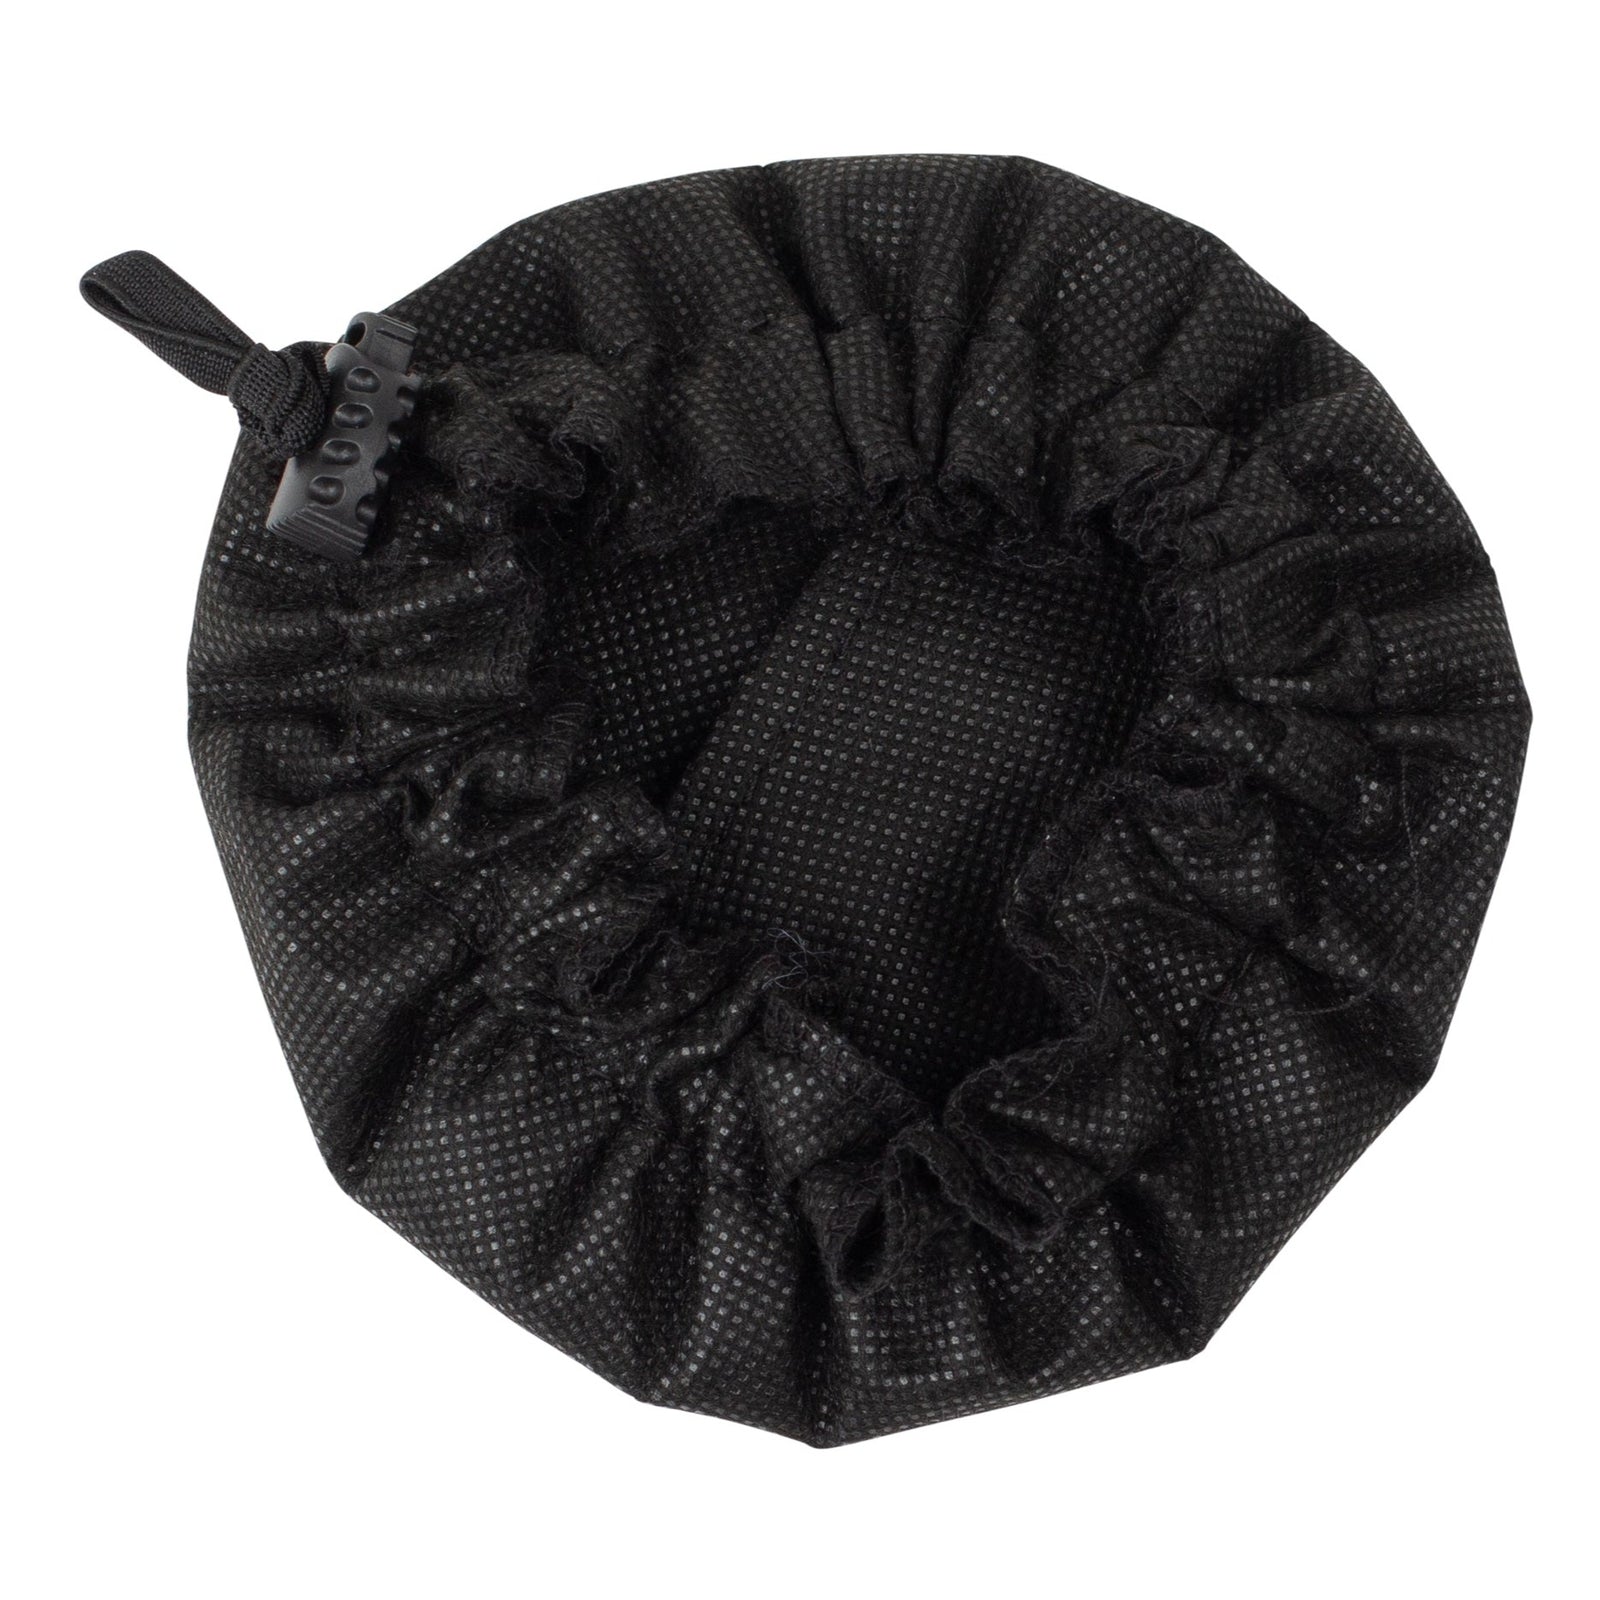 BLACK DUAL-LAYER 2-3" INSTRUMENT BELL COVER